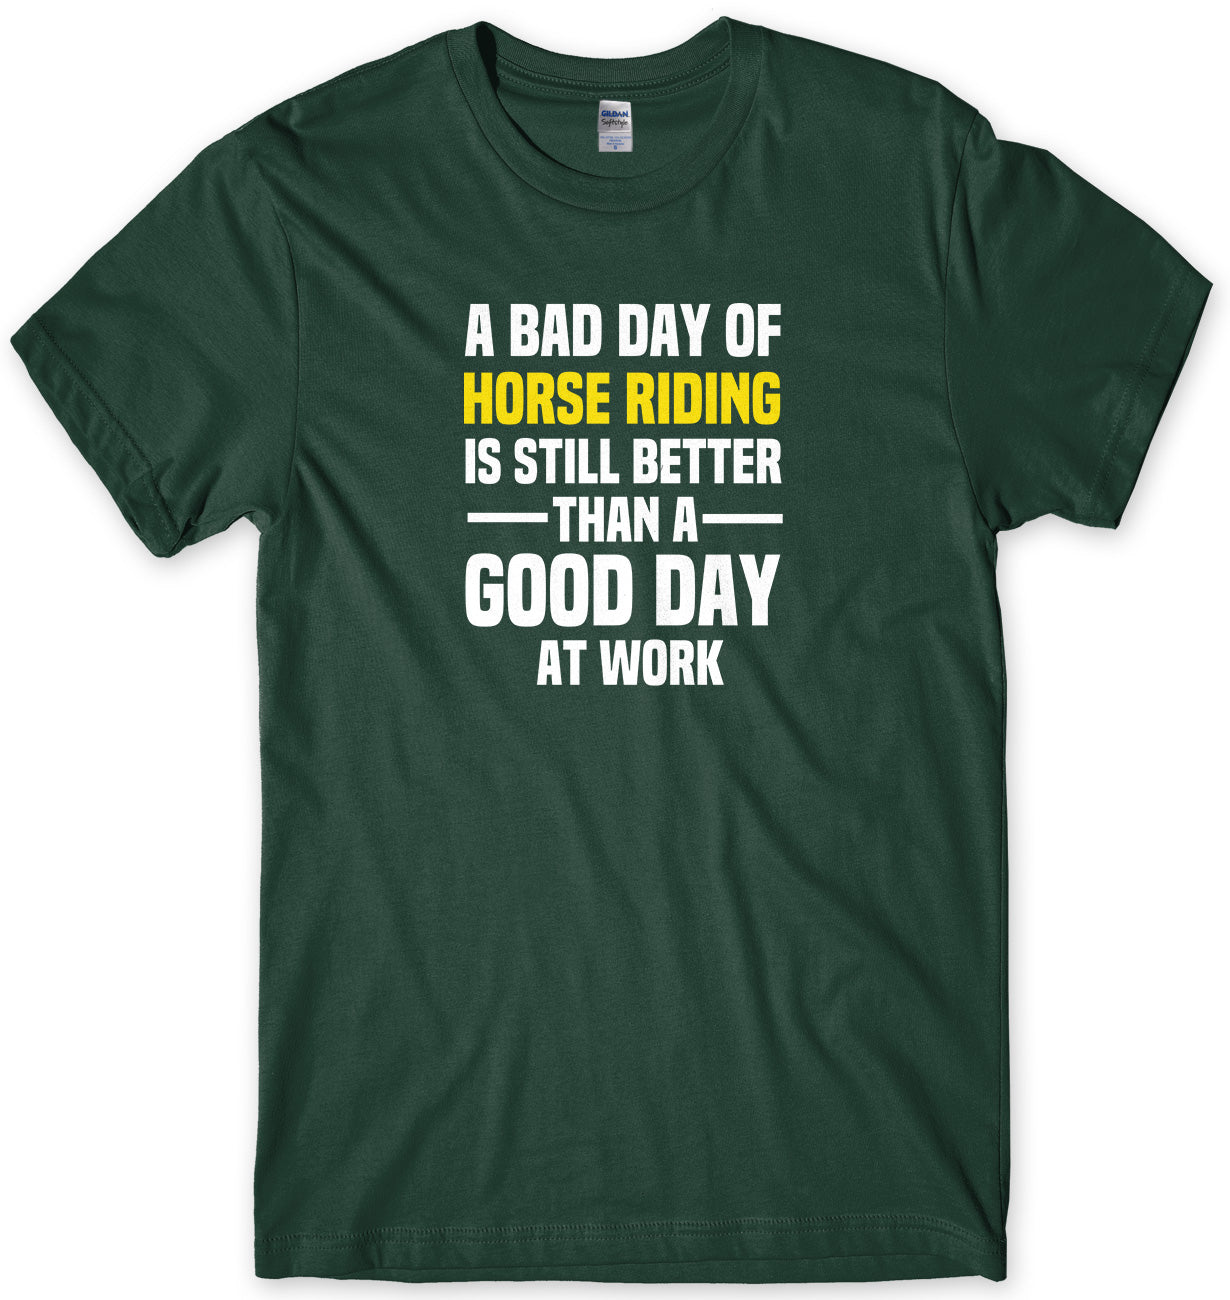 A BAD DAY OF HORSE RIDING IS STILL BETTER THAN A GOOD DAY AT WORK MENS FUNNY SLOGAN UNISEX T-SHIRT - StreetSide Surgeons